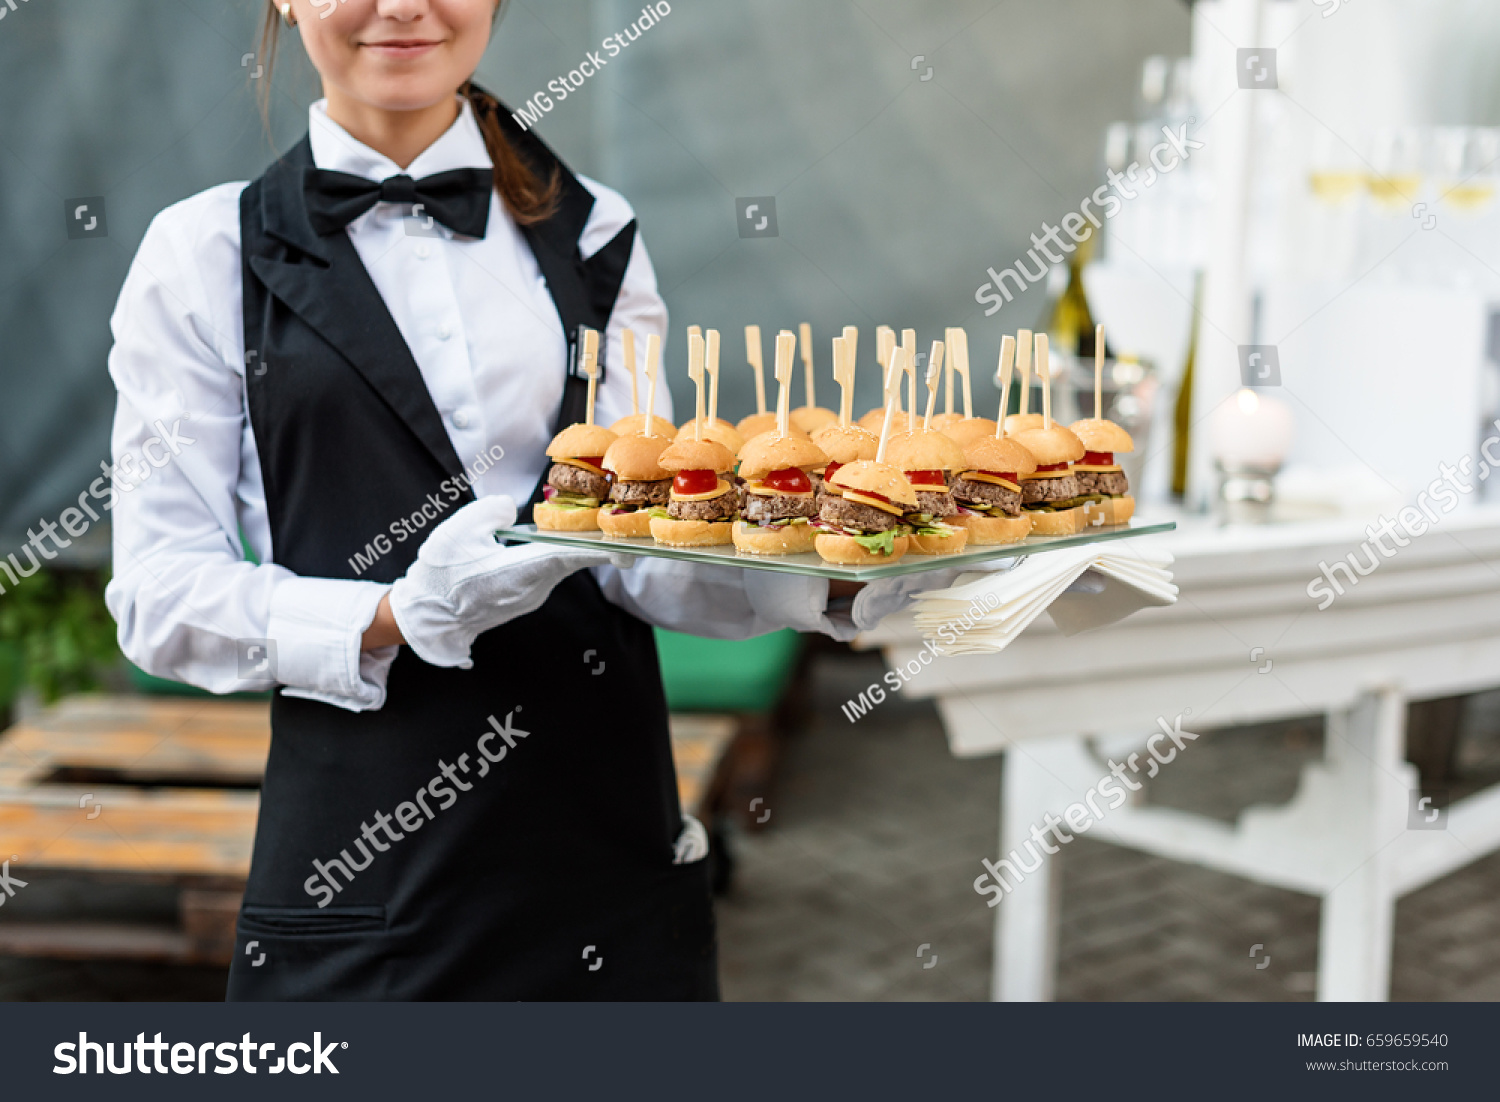 Catering service. Waiter carrying a tray of appetizers. Outdoor party with finger food, mini burgers, sliders. #659659540